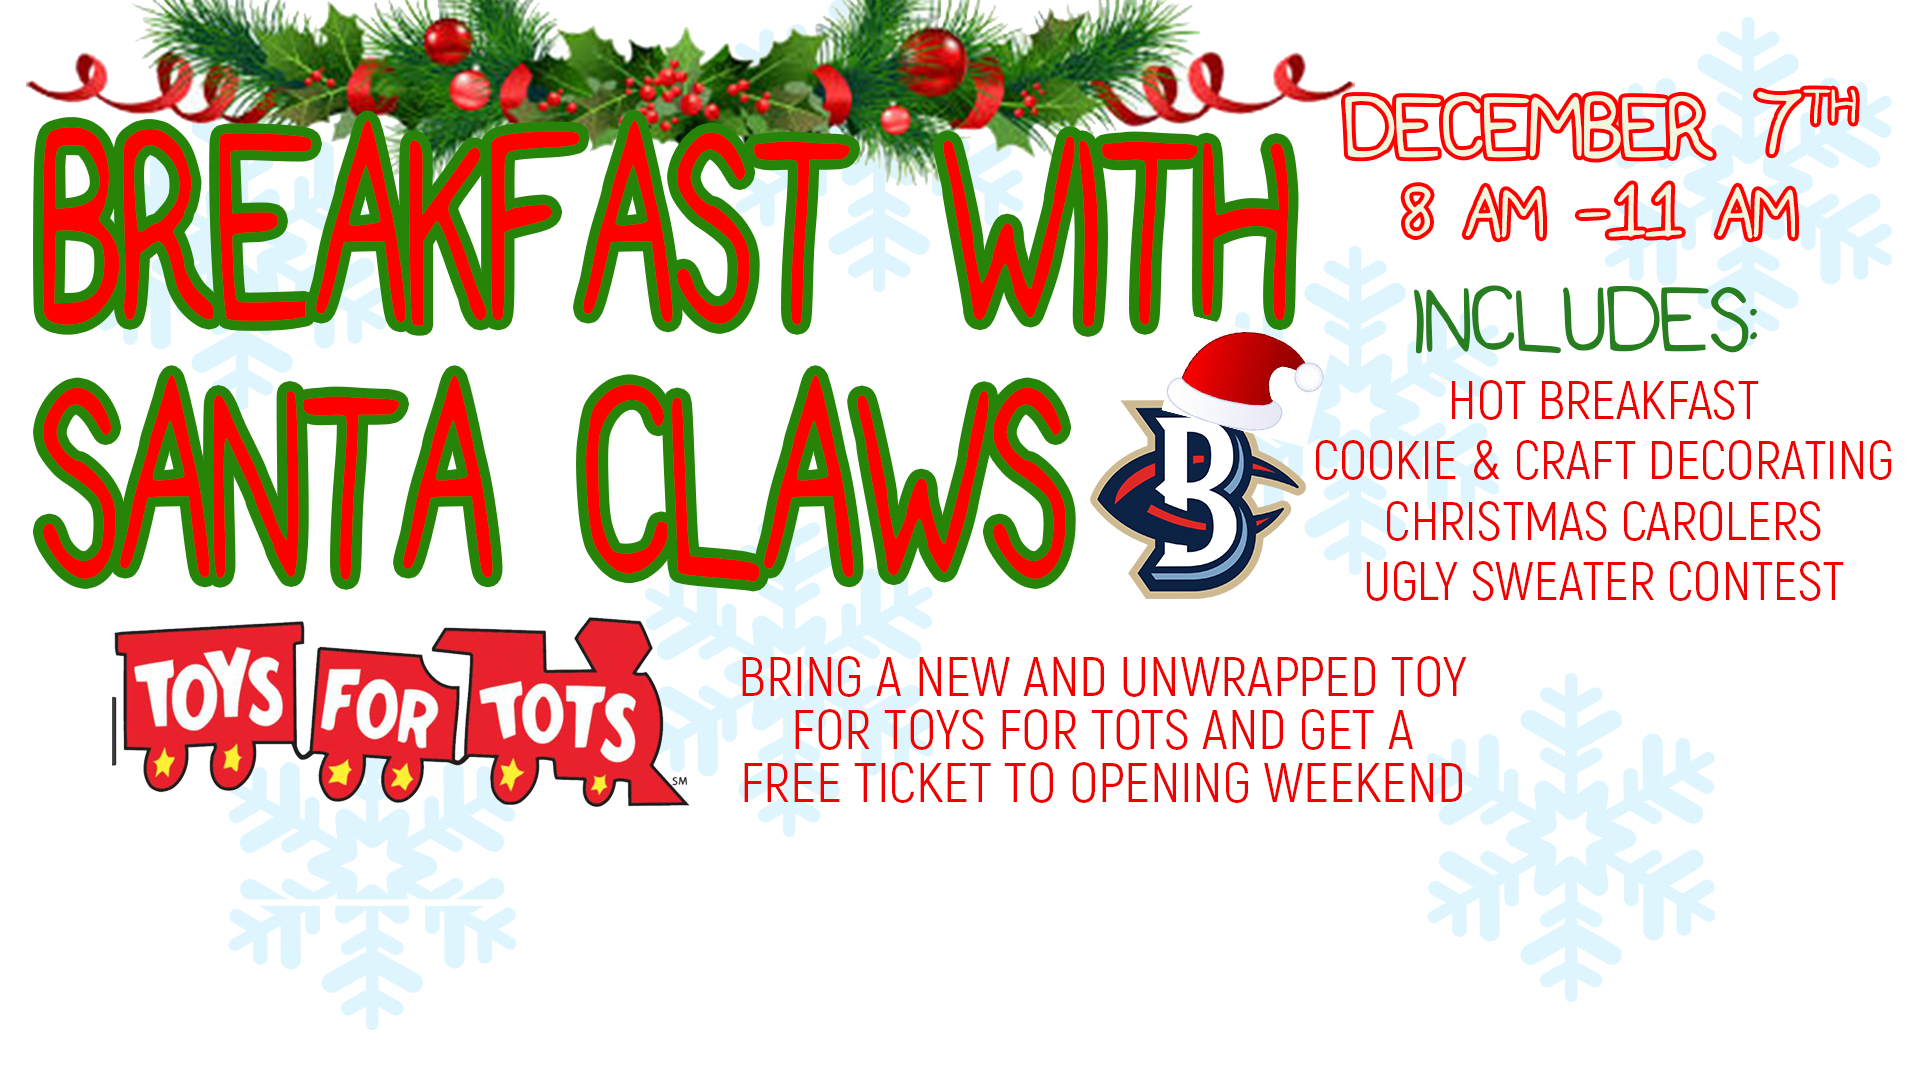 Breakfast With Santa Claws Returns